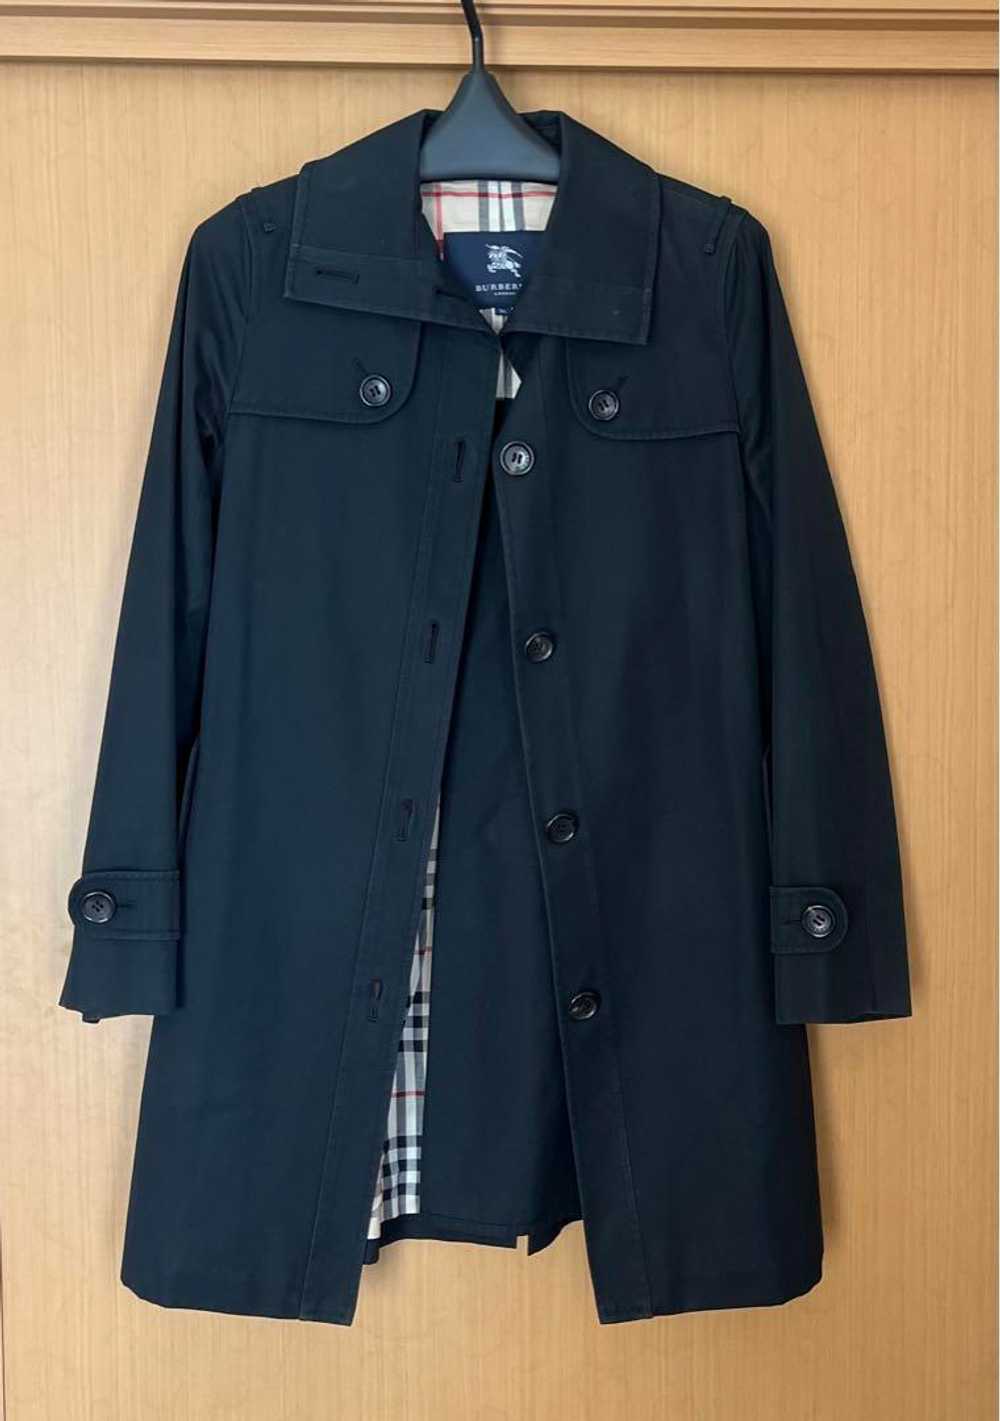 Burberry Authentic Trench Half Coat Navy Blue wit… - image 1